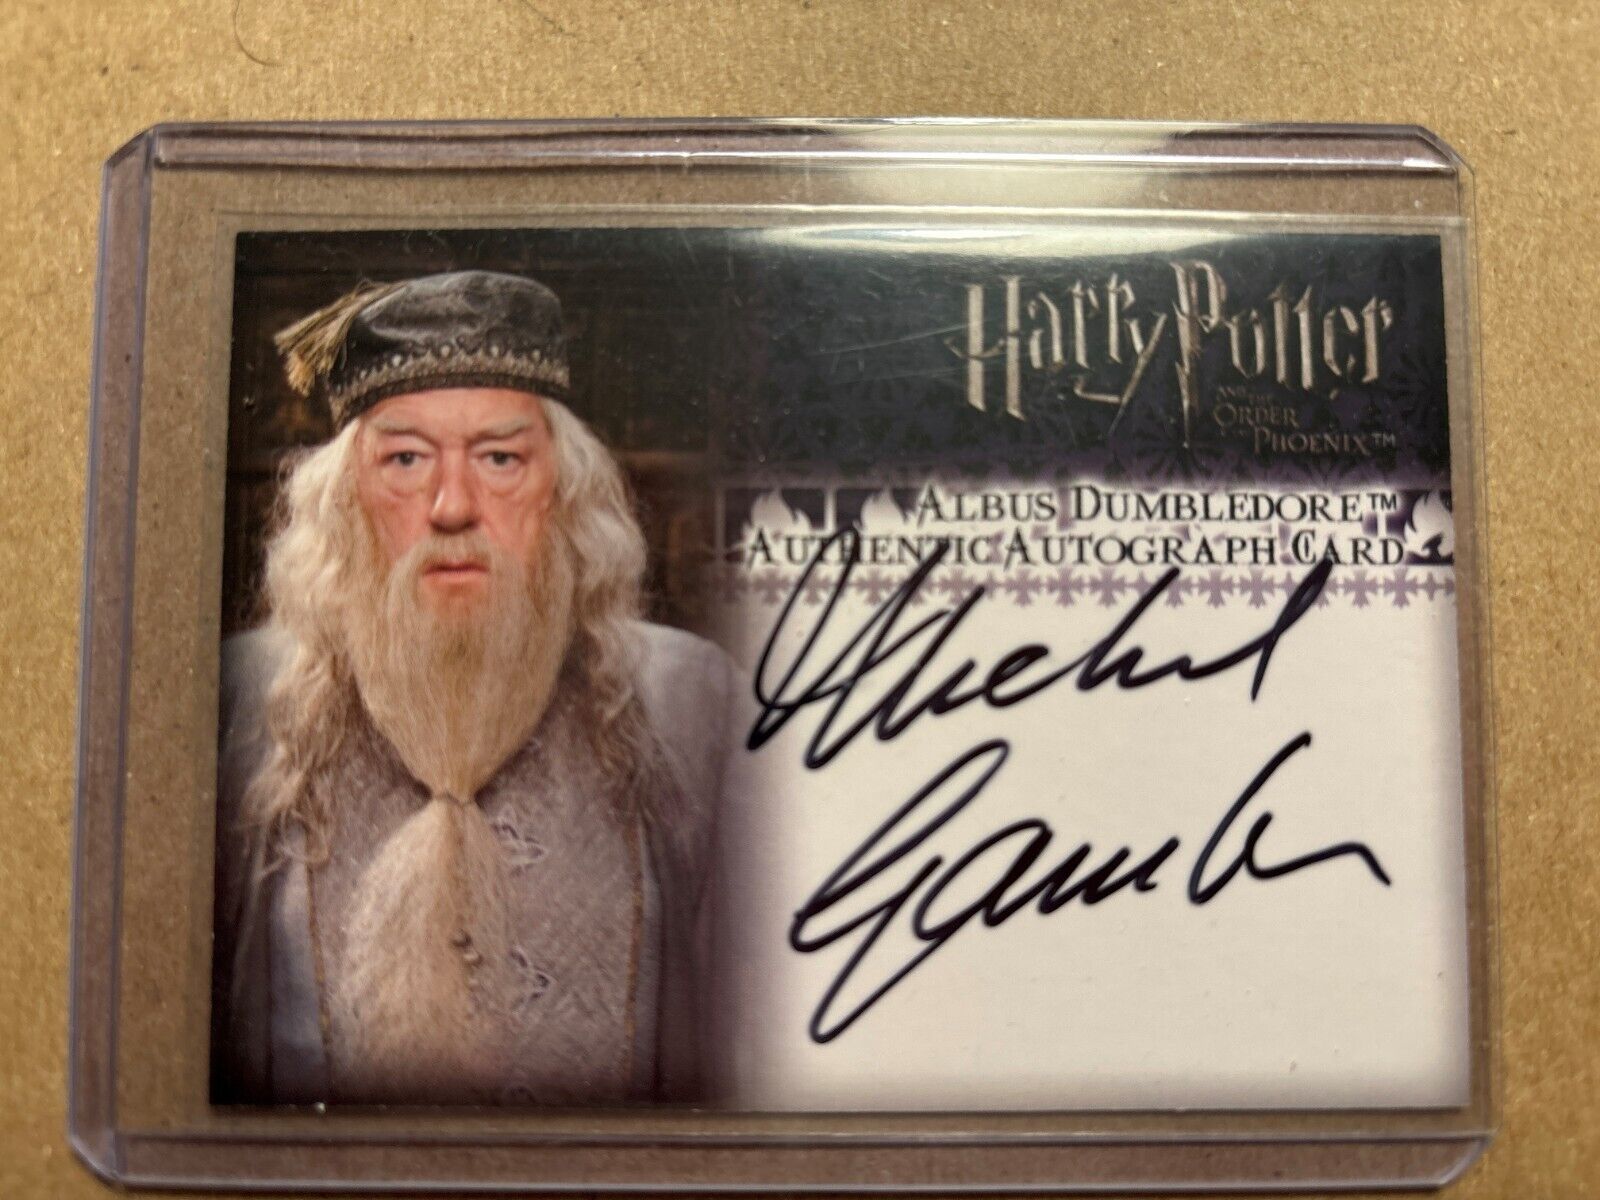 Harry Potter and the Order Of The Phoenix Michael Gambon￼ Dumbledore￼ Autograph